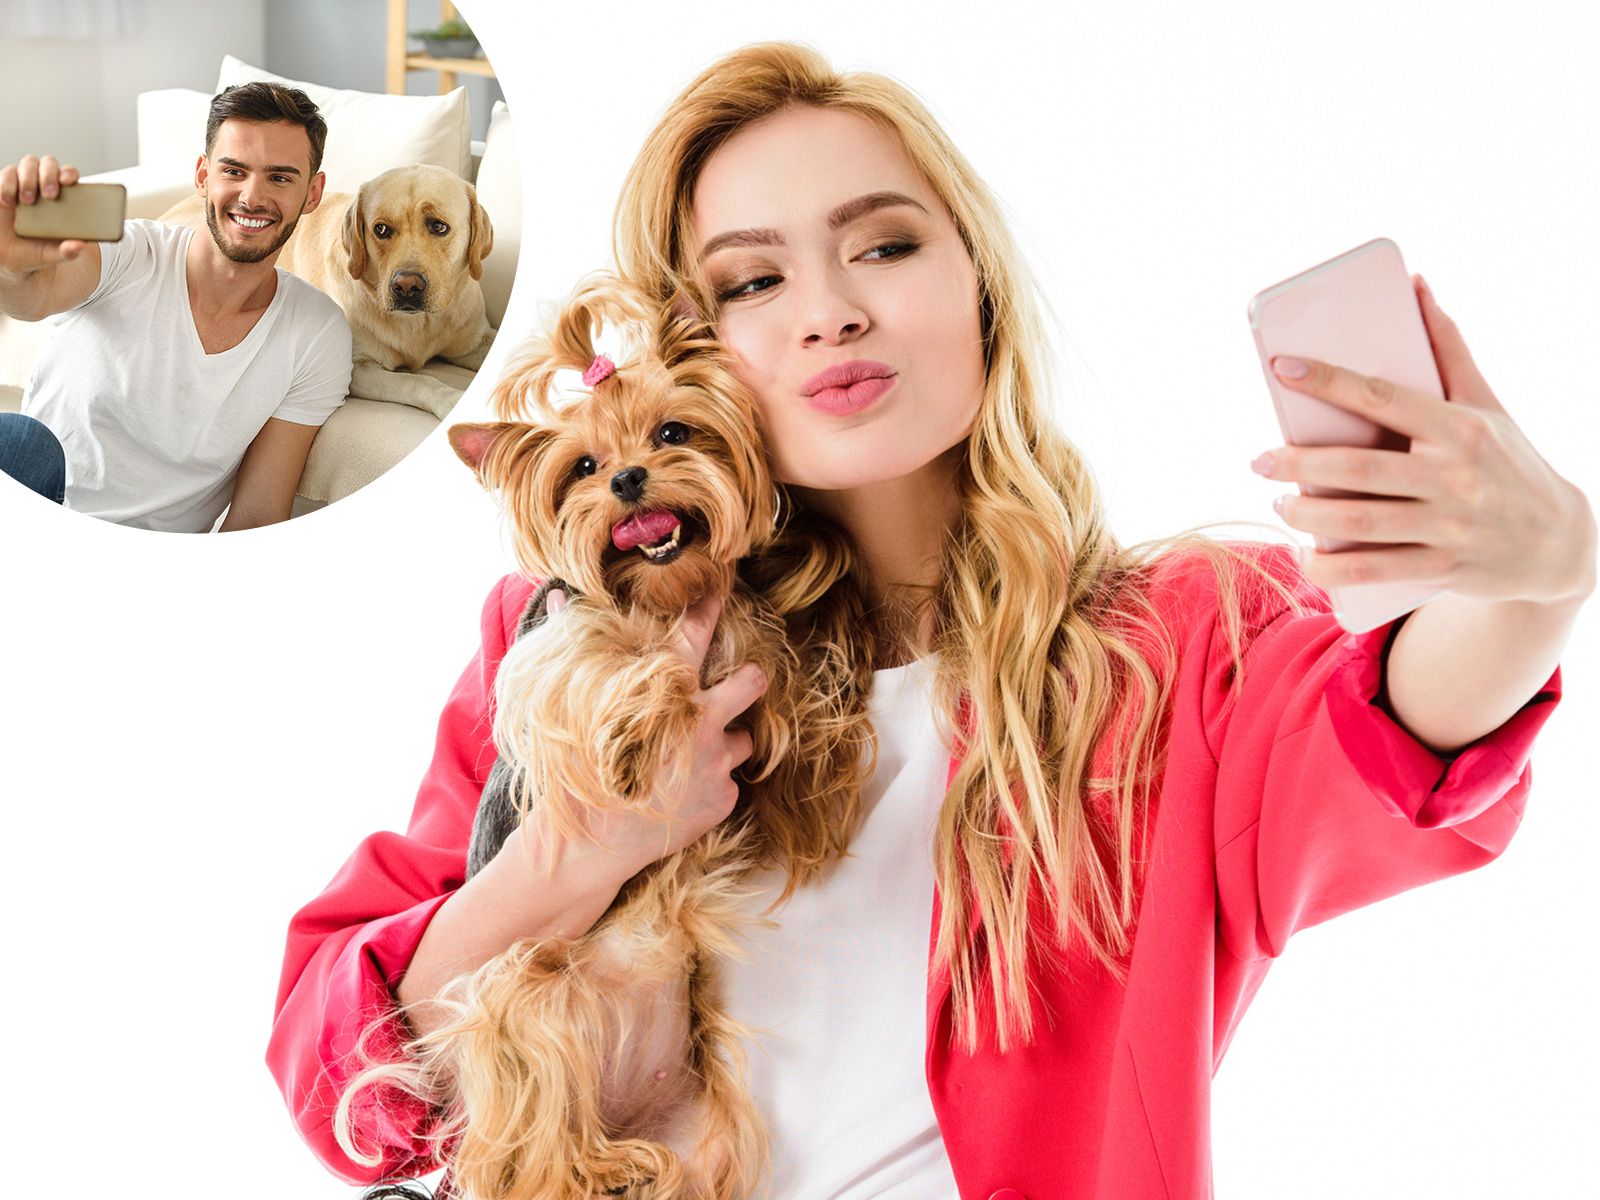 Attention Singletons, Why Selfies With Your Dog Make You More Attractive